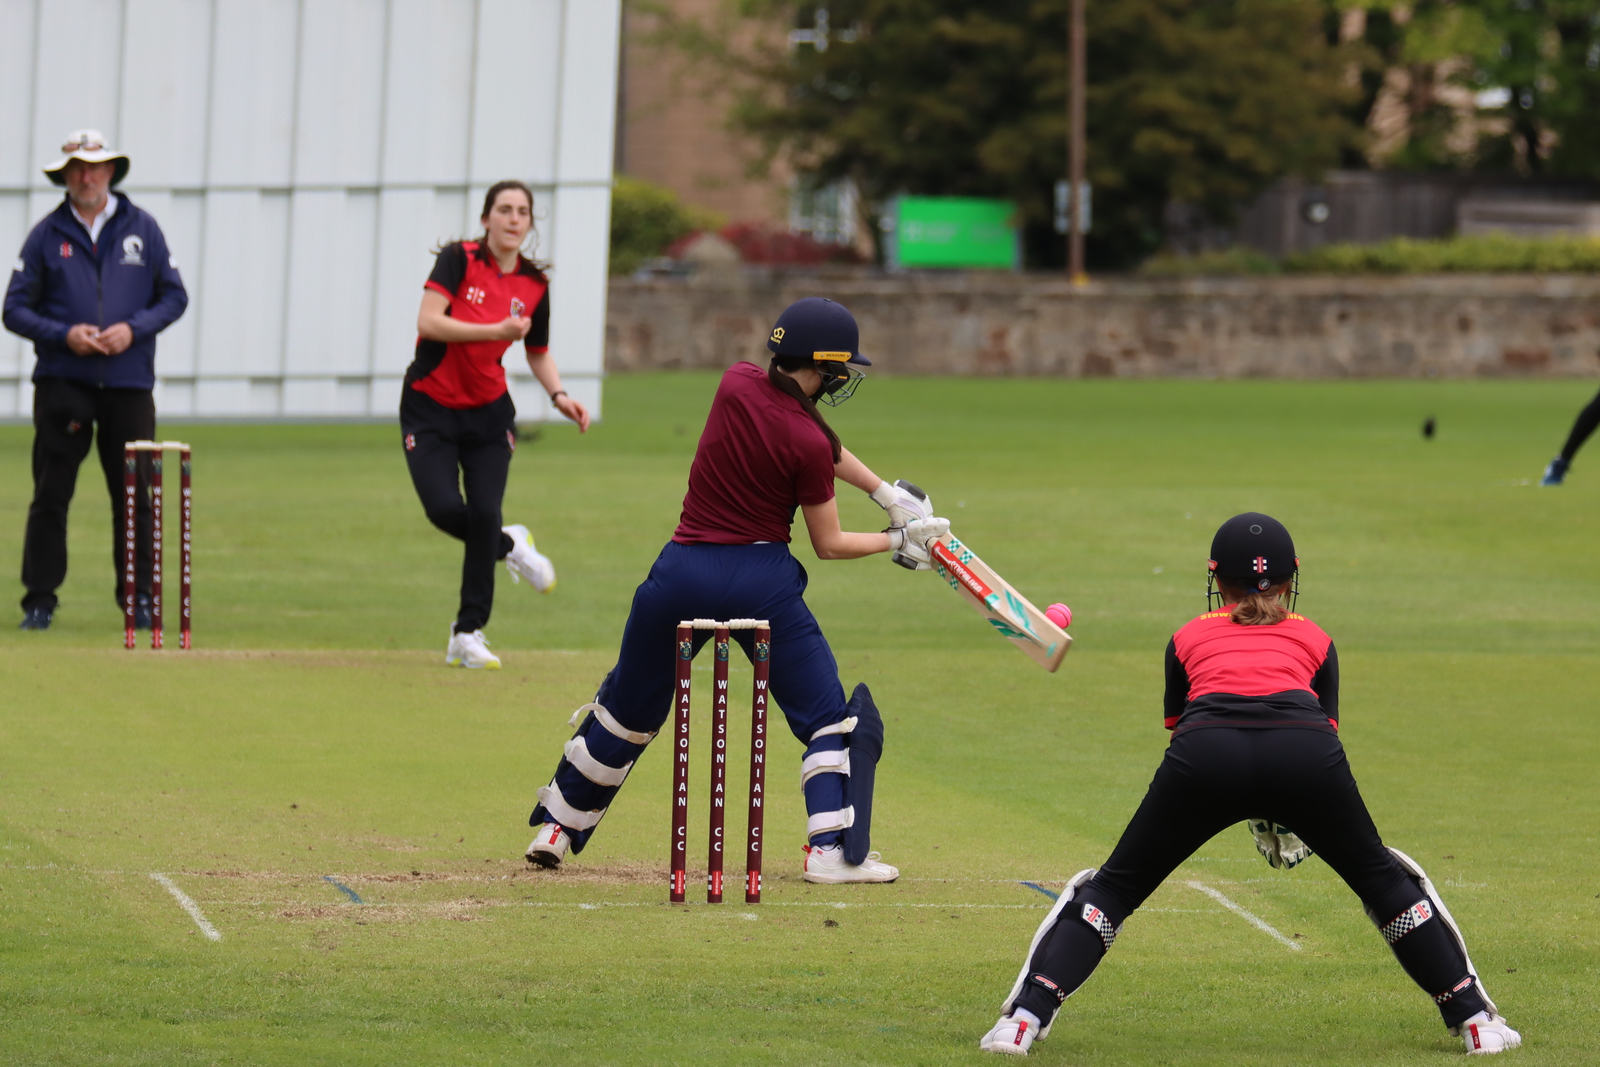 FOUR TEAMS TO BATTLE IT OUT FOR WOMEN’S T20 SCOTTISH CUP